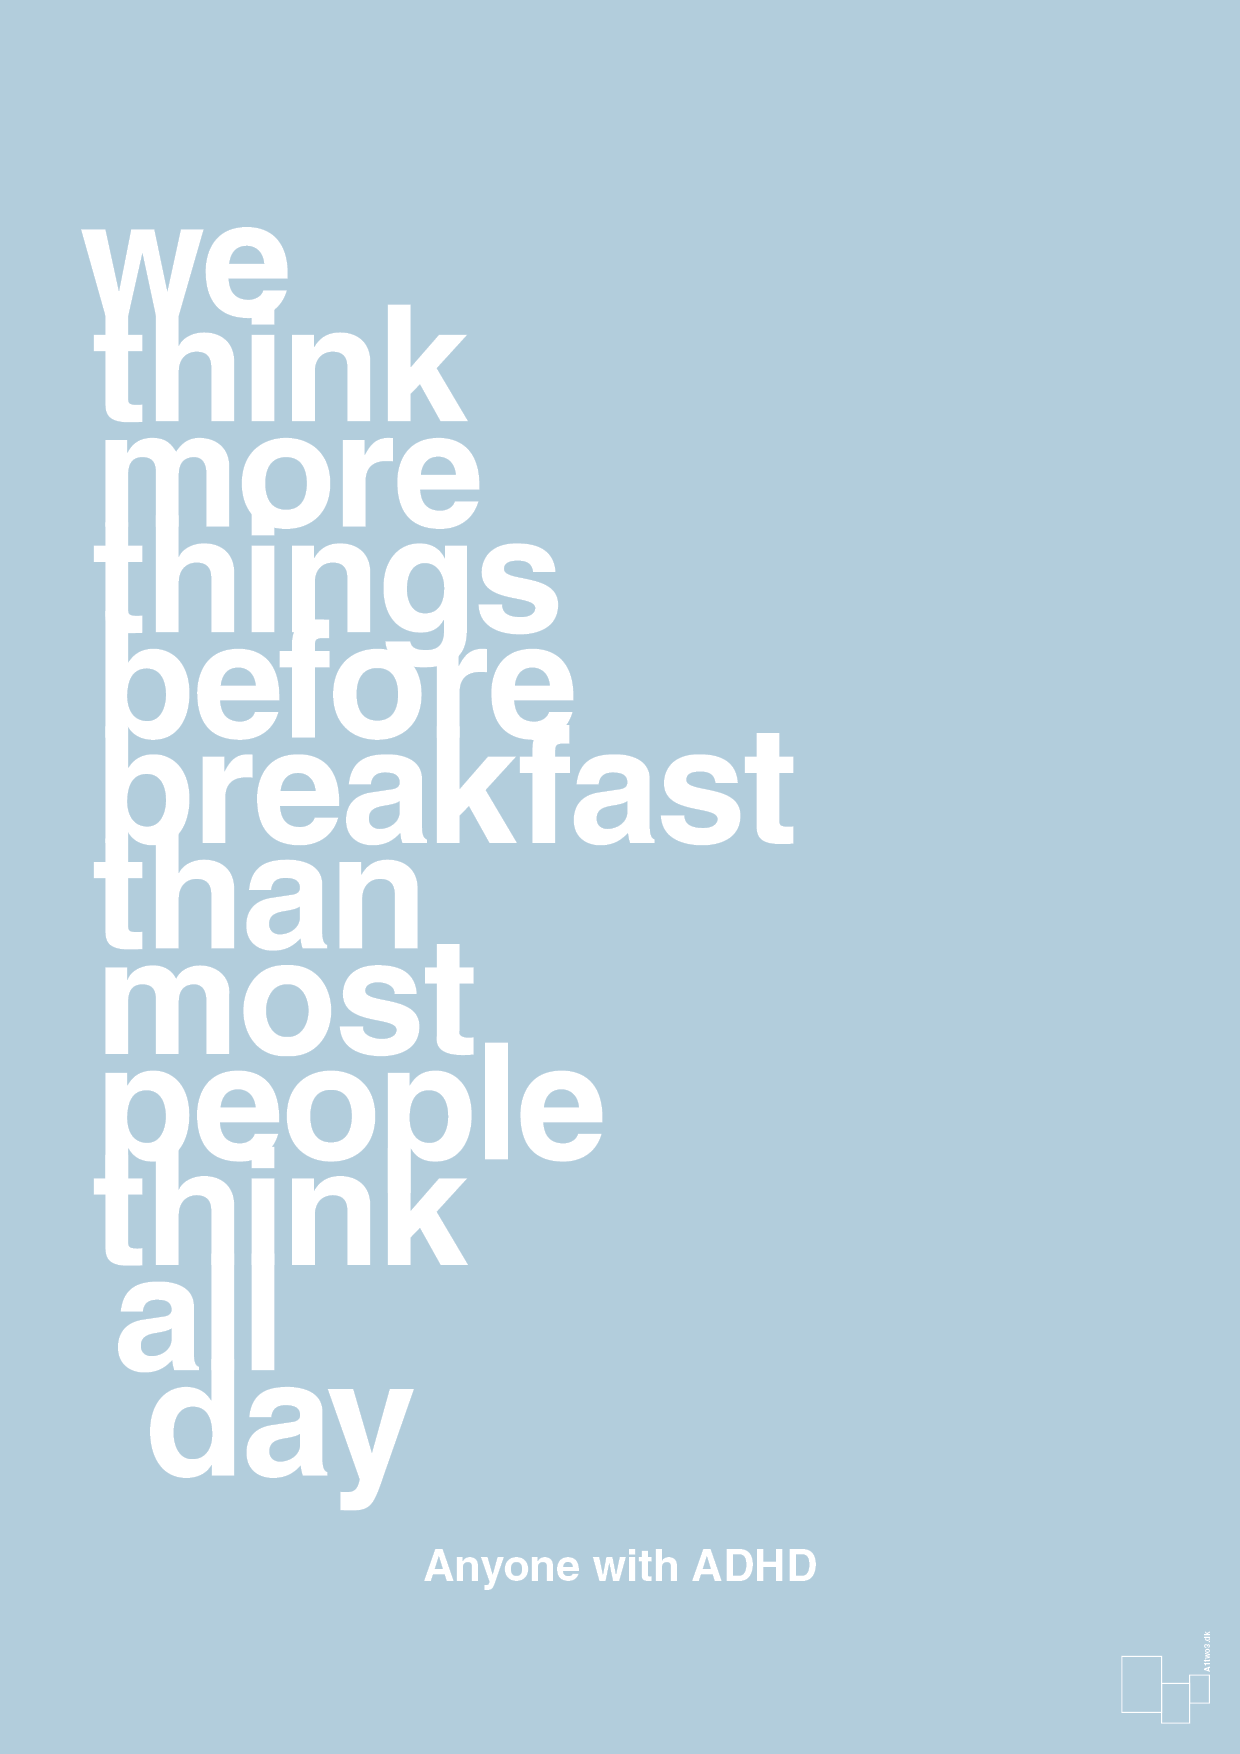 we think more things before breakfast than most people think all day - Plakat med Samfund i Heavenly Blue